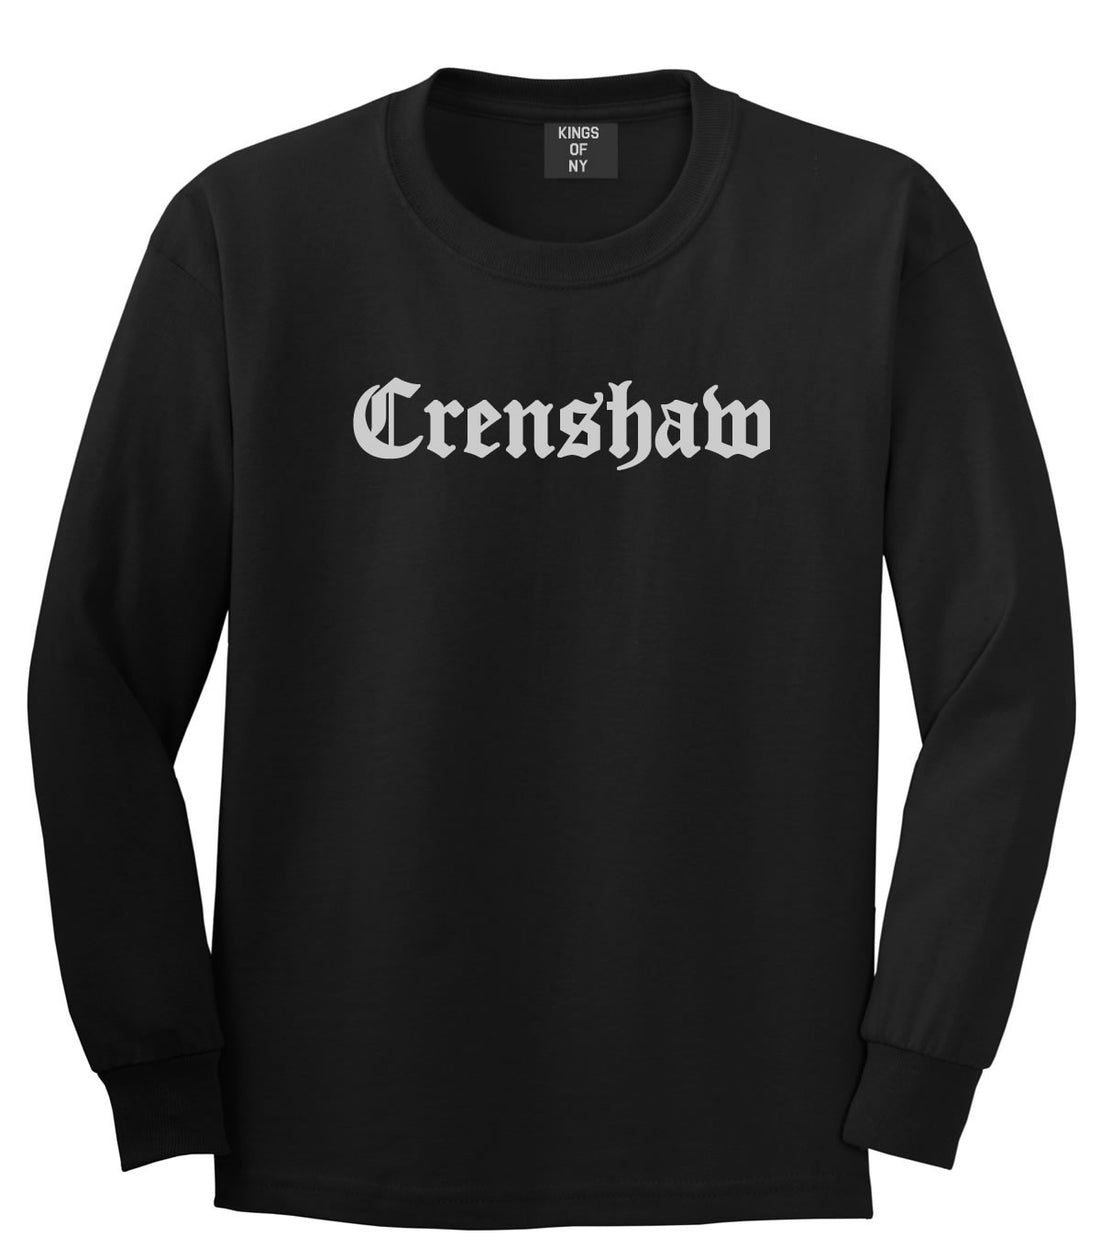 Crenshaw Old English California Long Sleeve T-Shirt in Black By Kings Of NY